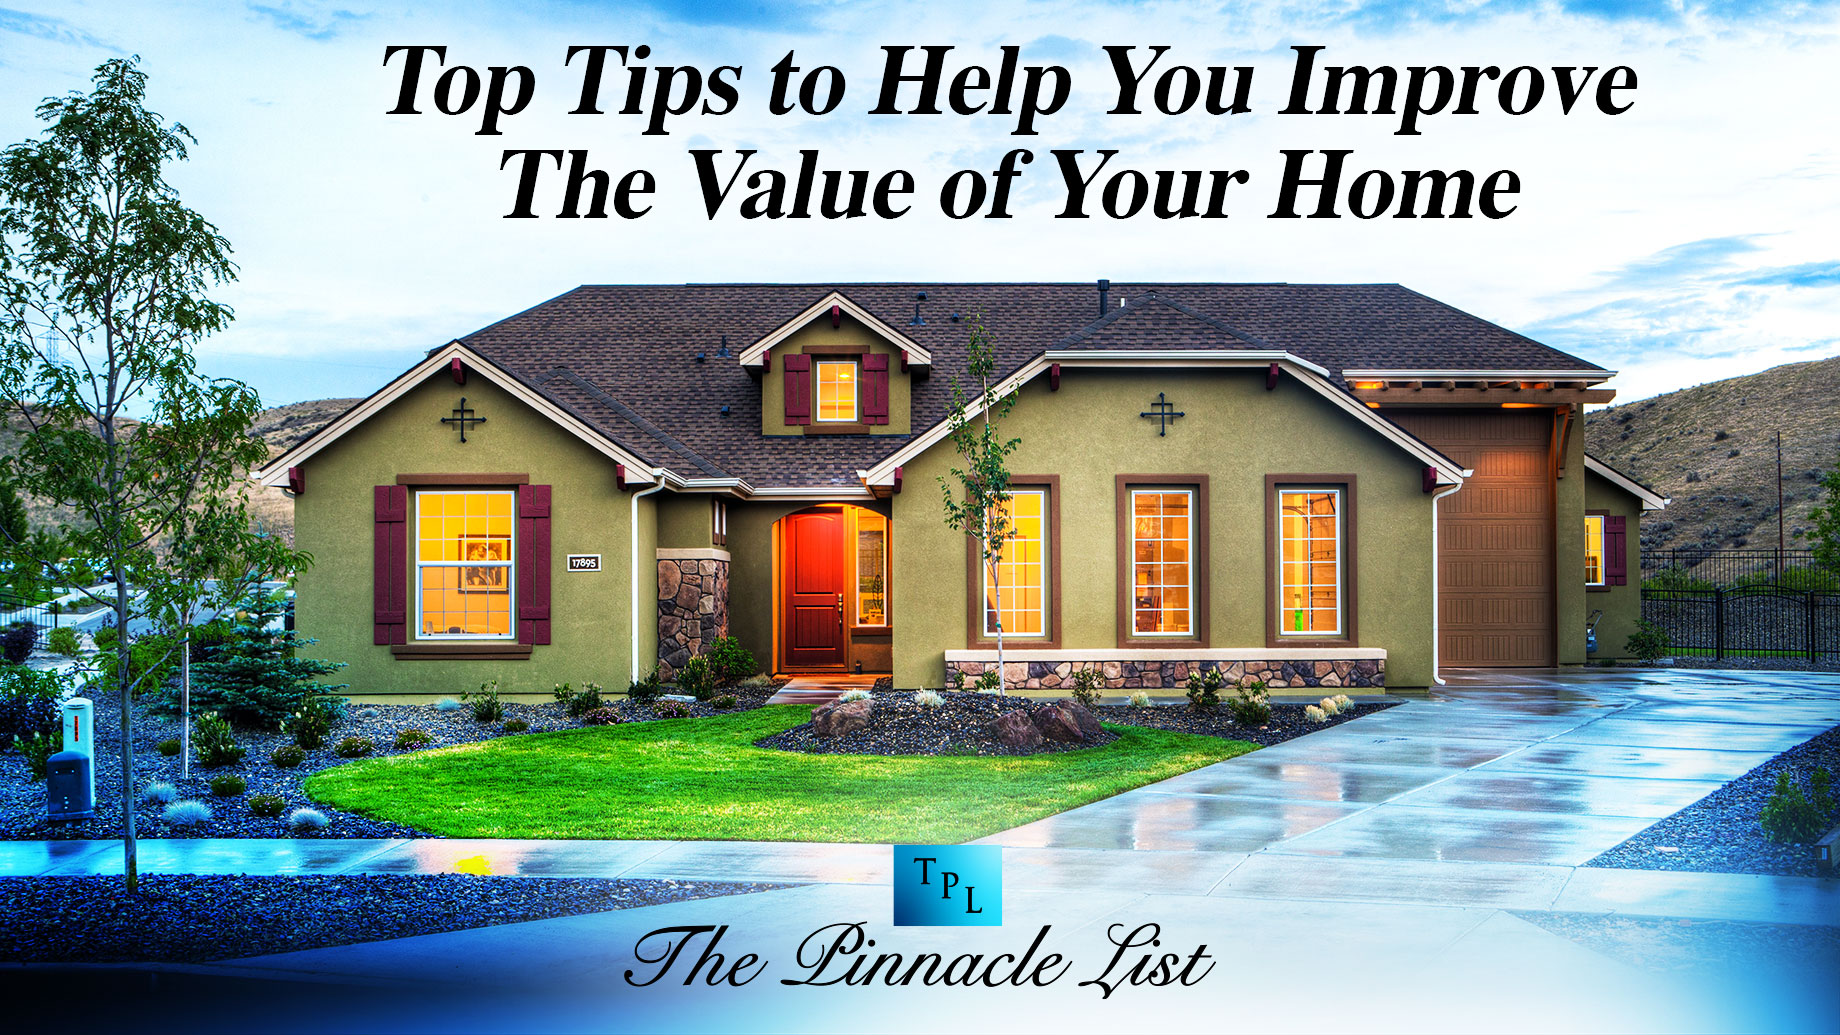 Top Tips to Help You Improve The Value of Your Home